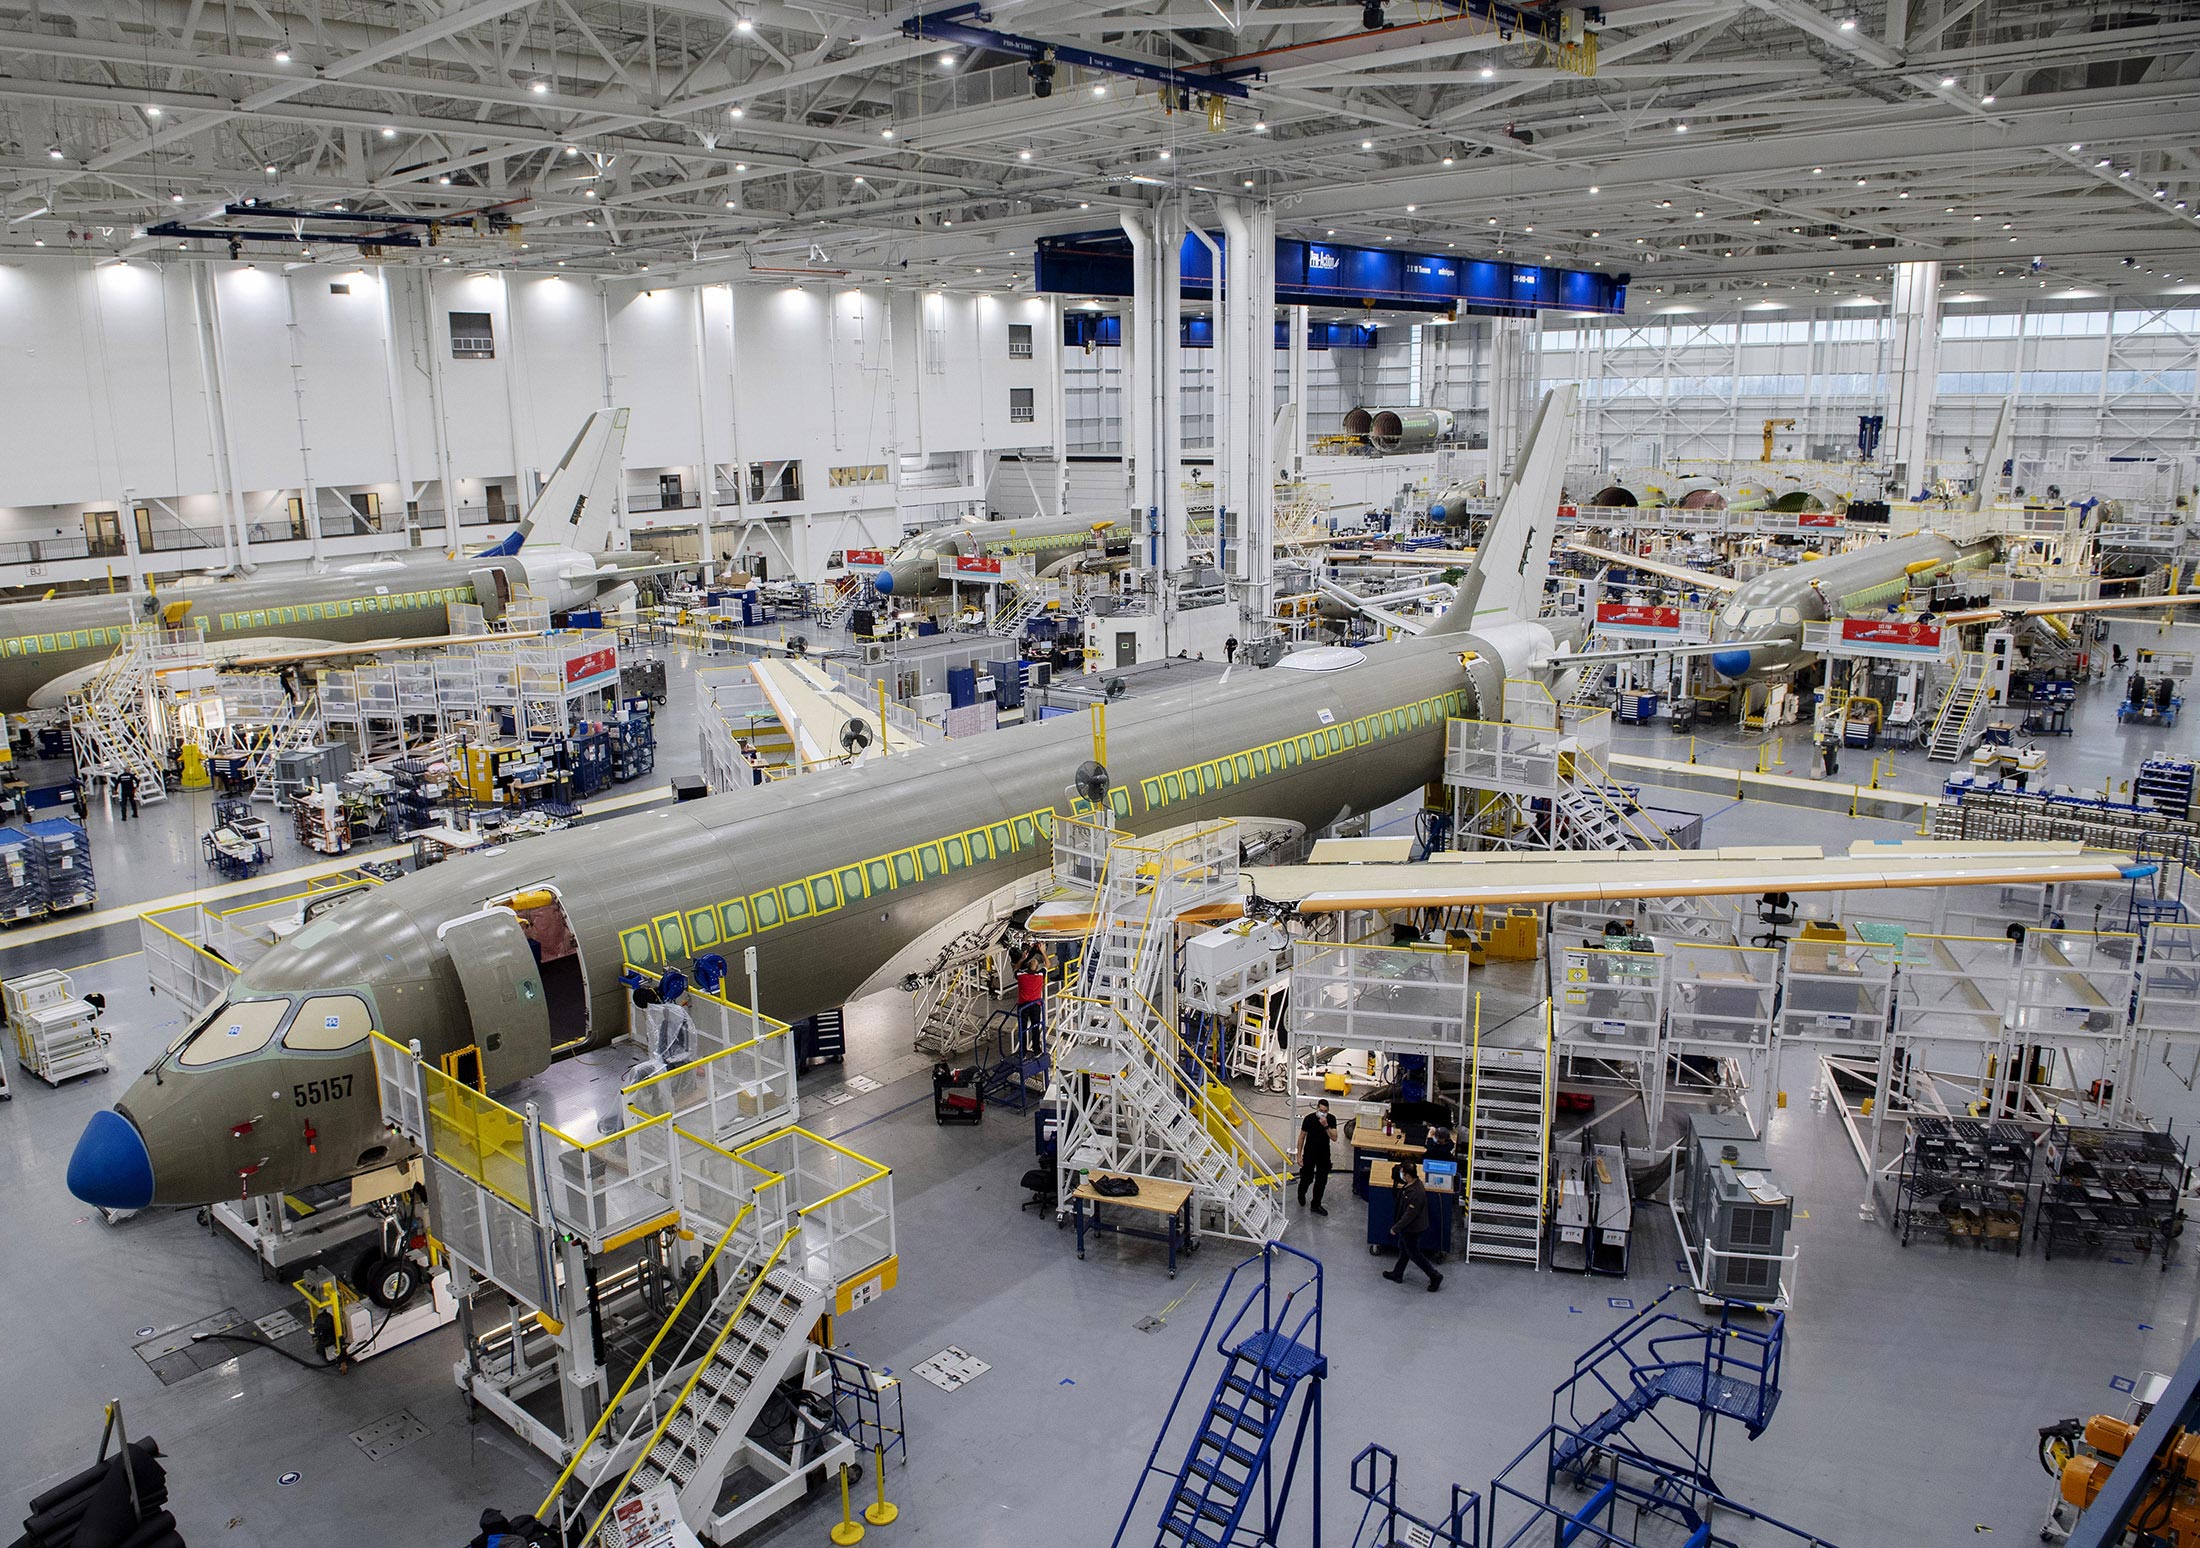 Airbus has added production space at its A220 plant in Mirabel, Quebec, as it ramps up production.